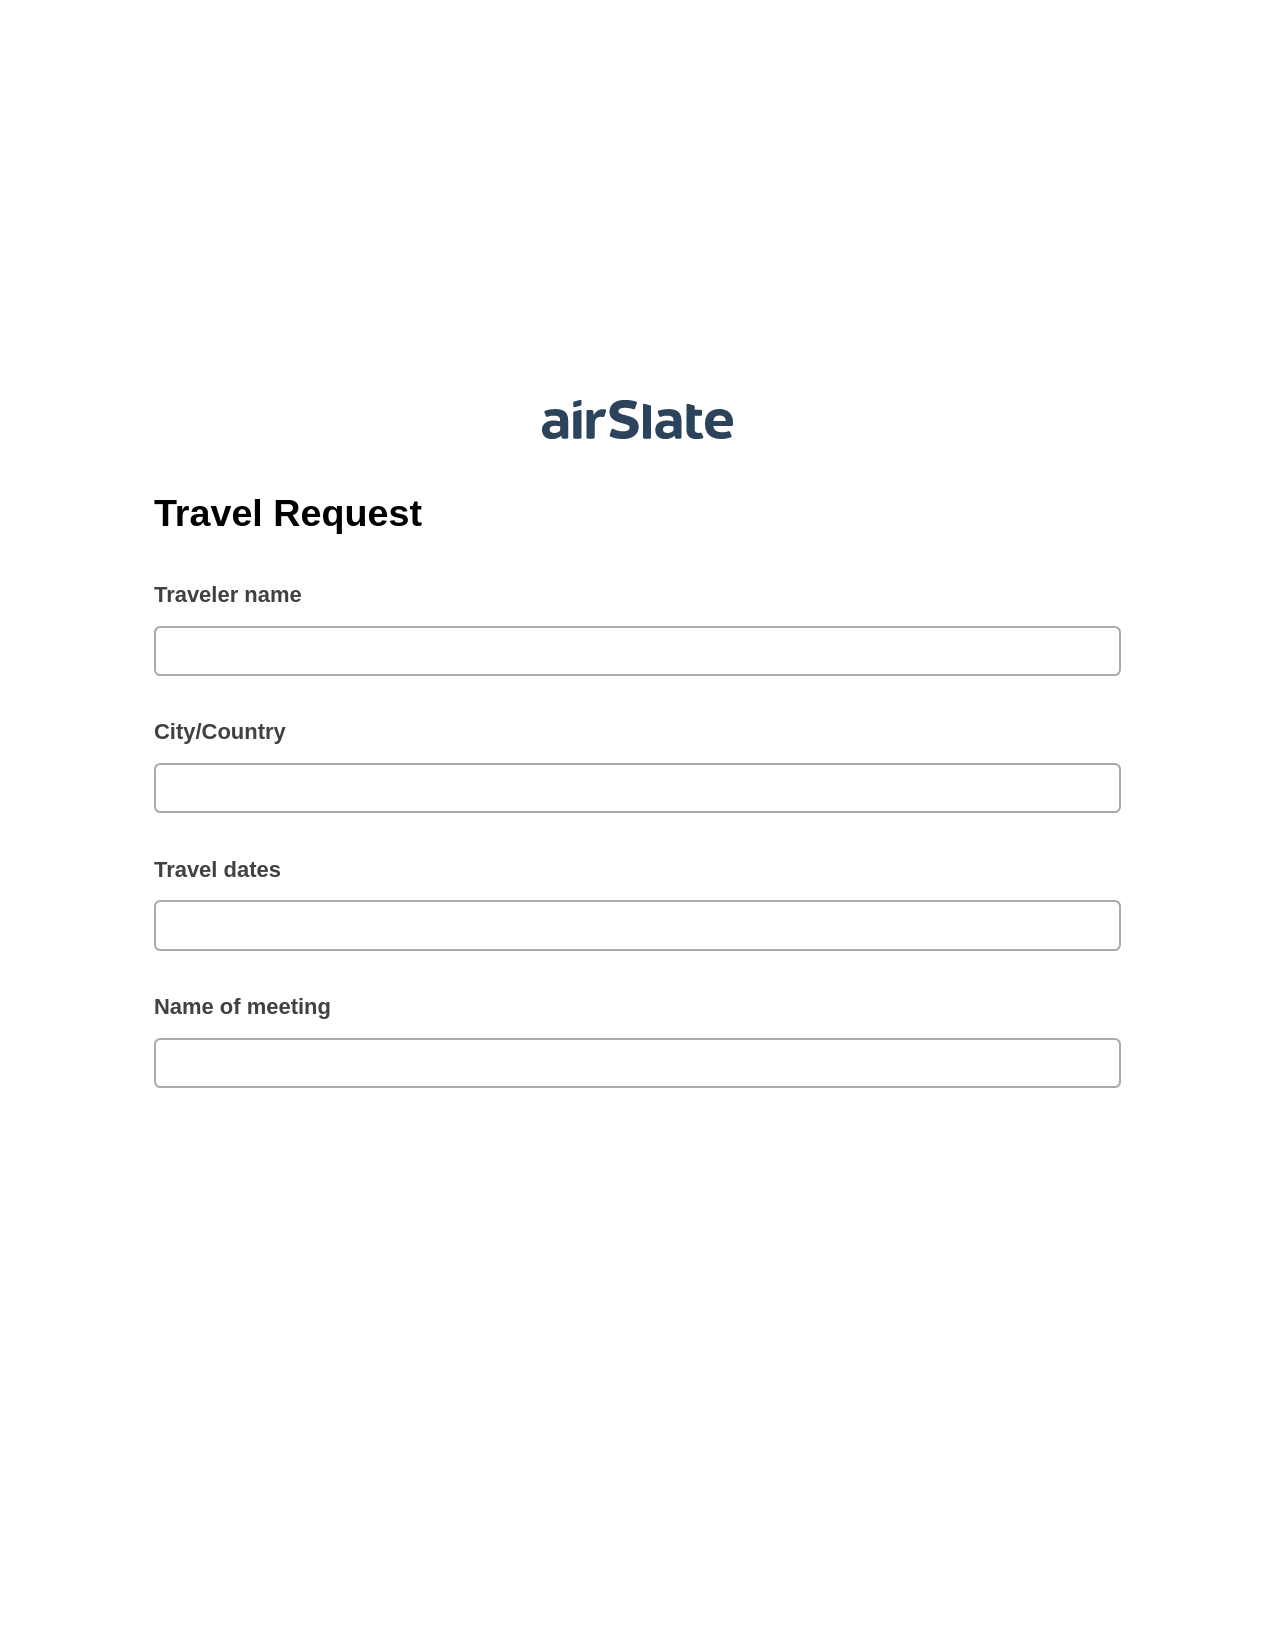 Travel Request Pre-fill Dropdown from Airtable, Pre-fill with Custom Data Bot, Slack Notification Postfinish Bot